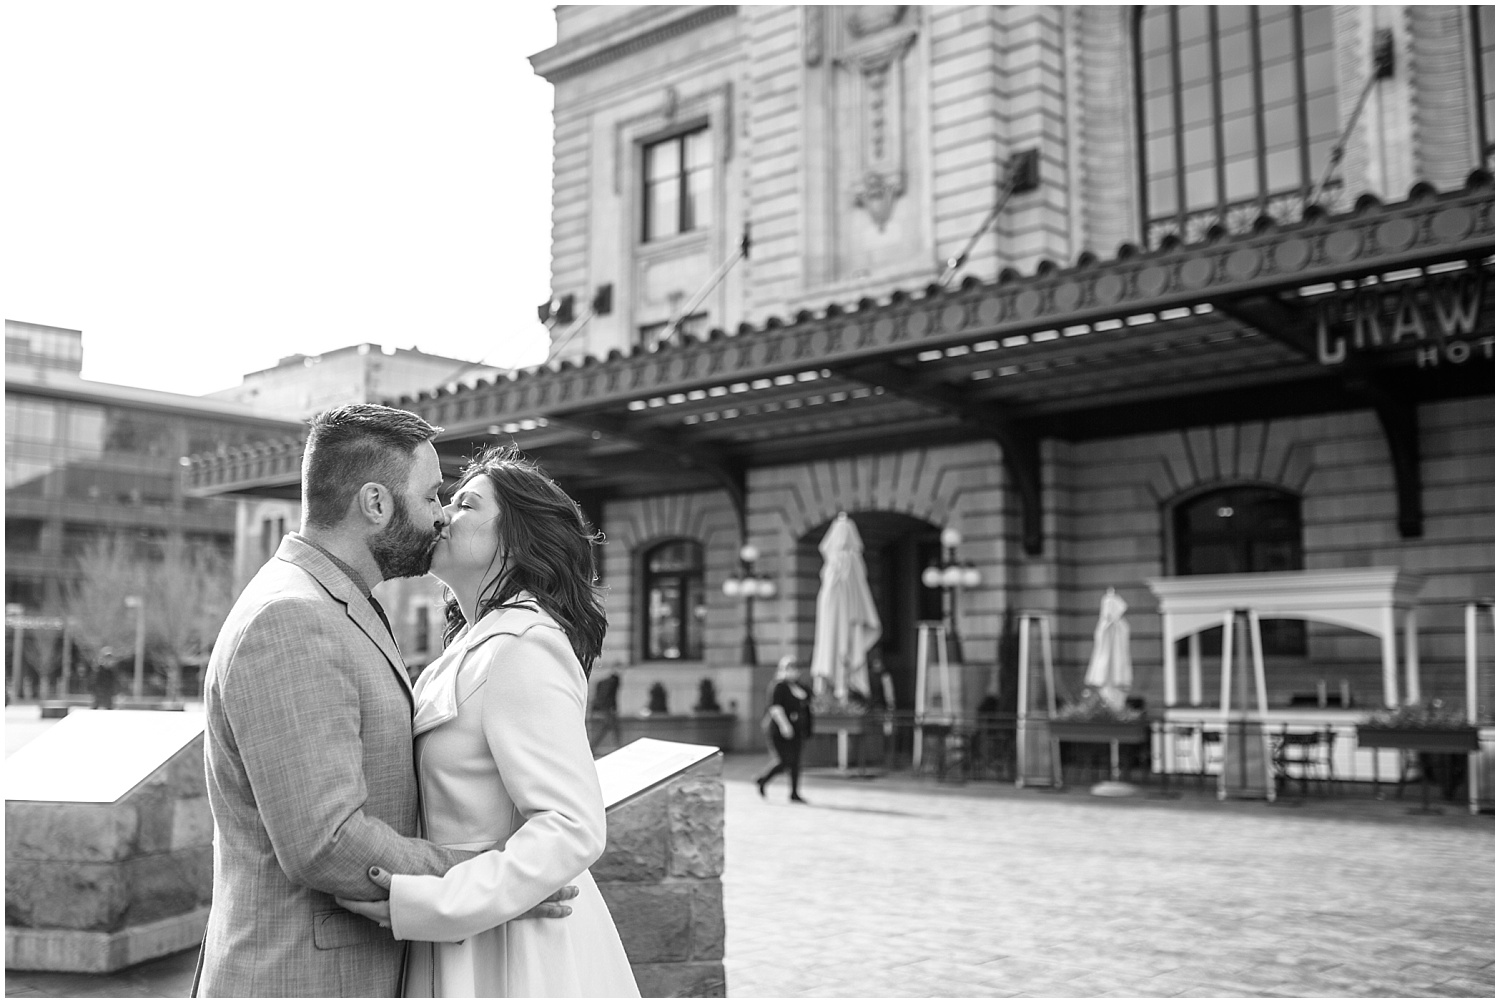 Downtown Denver engagement photos by Union Station in LoDo.